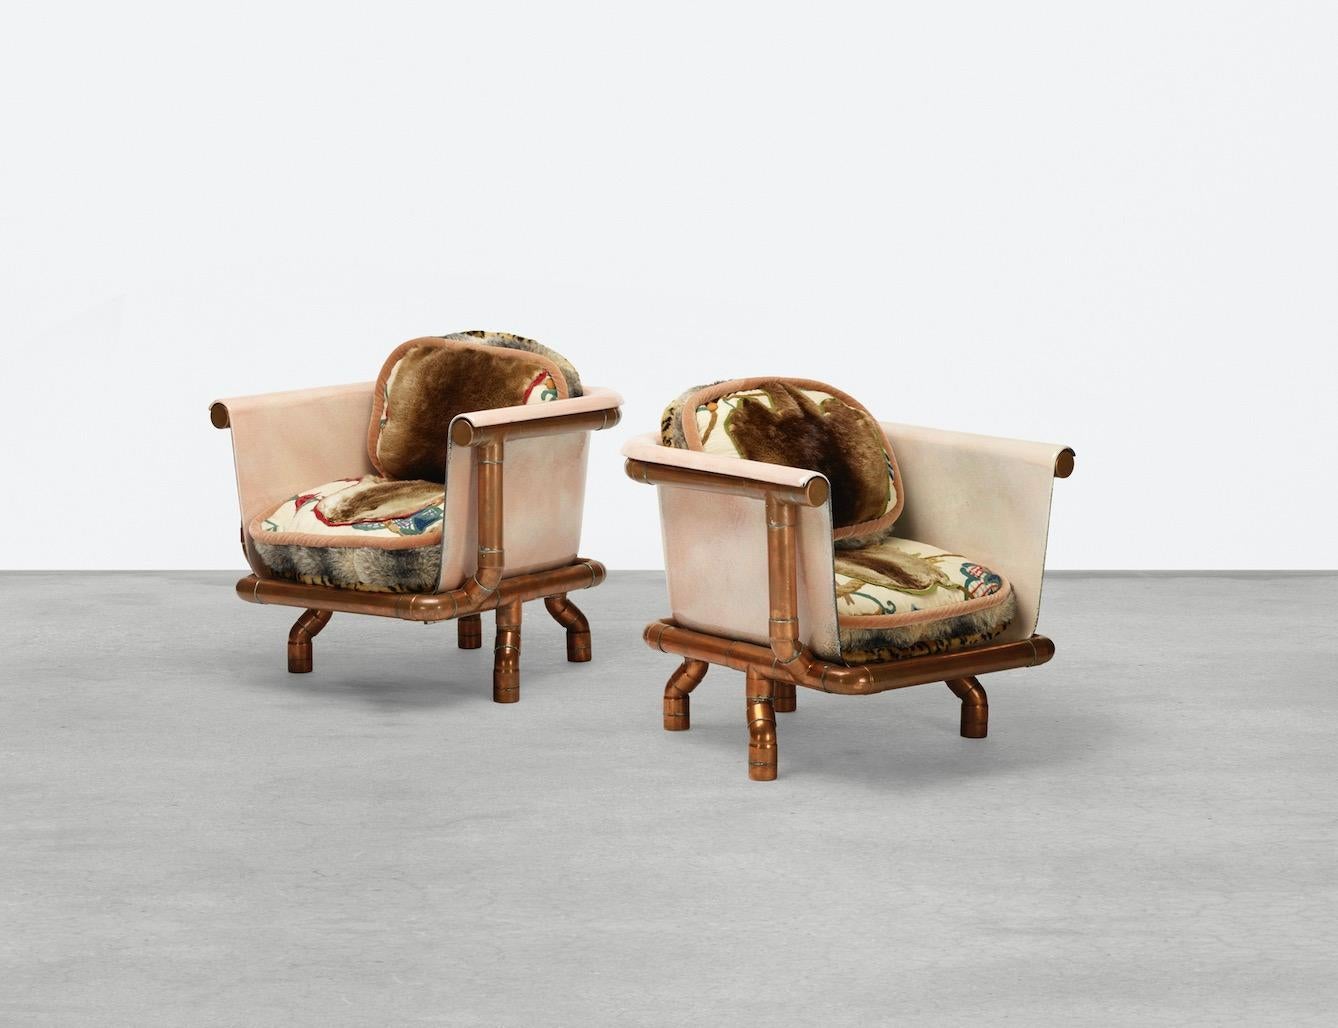 Unique set of Joel Otterson armchairs. Constructed of enameled cast iron, copper pipes, upholstery, animal hide, appropriated elements, 1993. One pair (2 total) available.